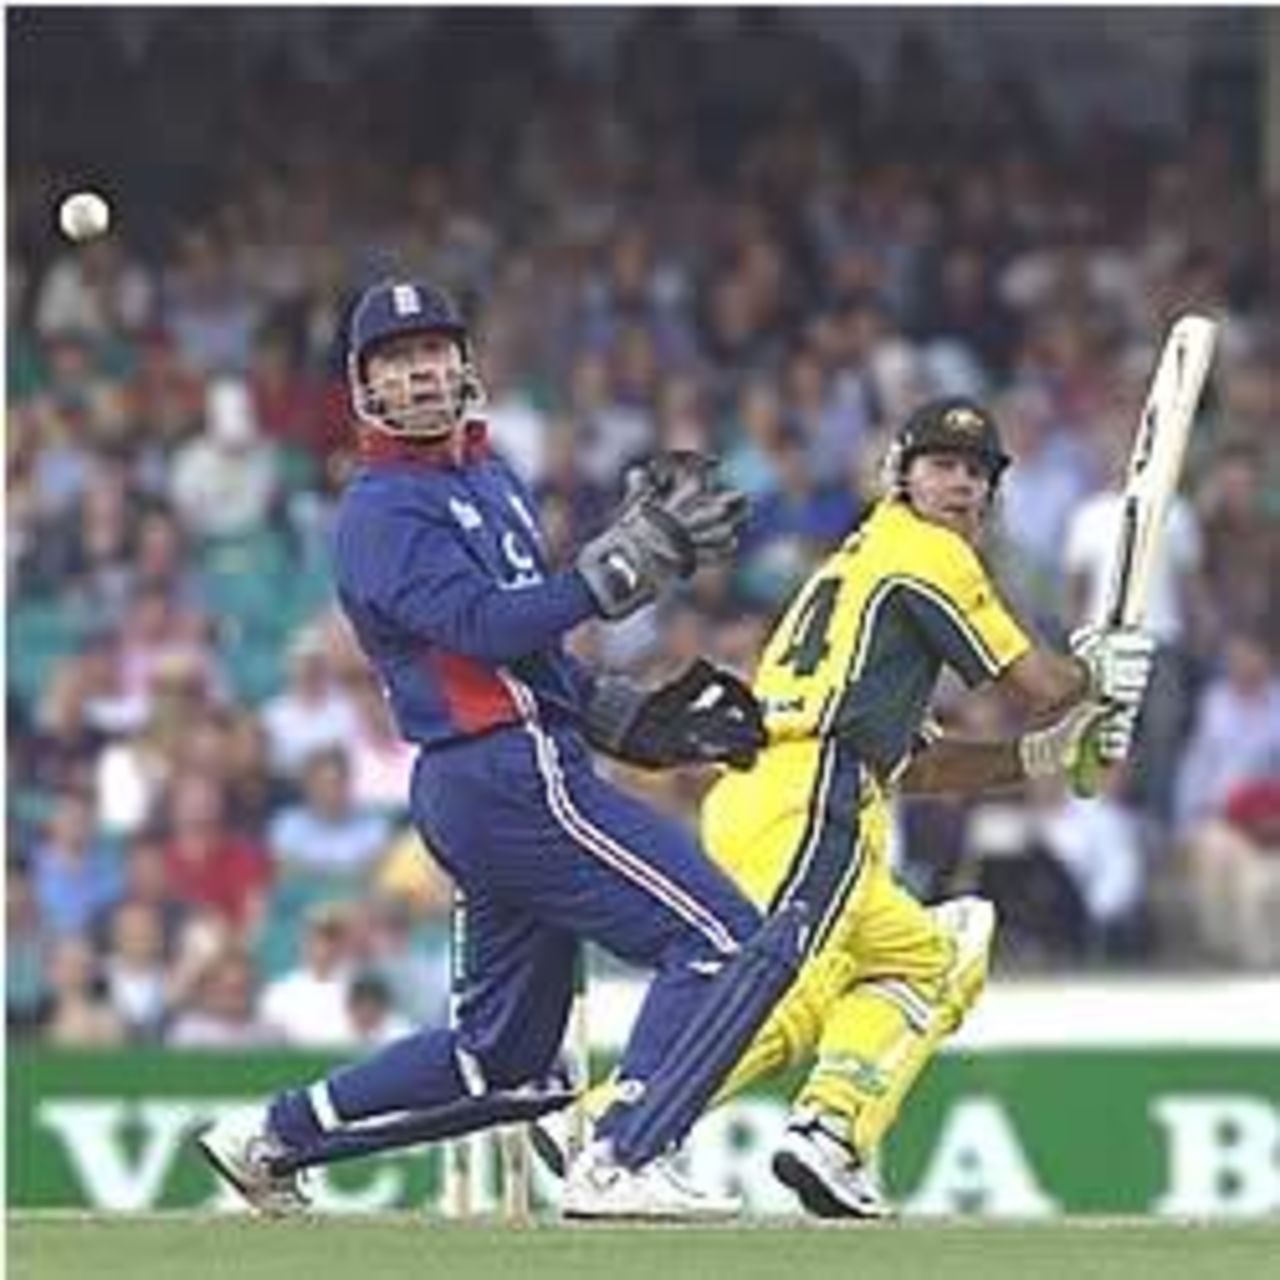 SYDNEY - DECEMBER 13: Ricky Ponting of Australia hits out past wicketkeeper Alec Stewart of England during the One Day International match between Australia and England at the Sydney Cricket Ground in Sydney, Australia on December 13, 2002.